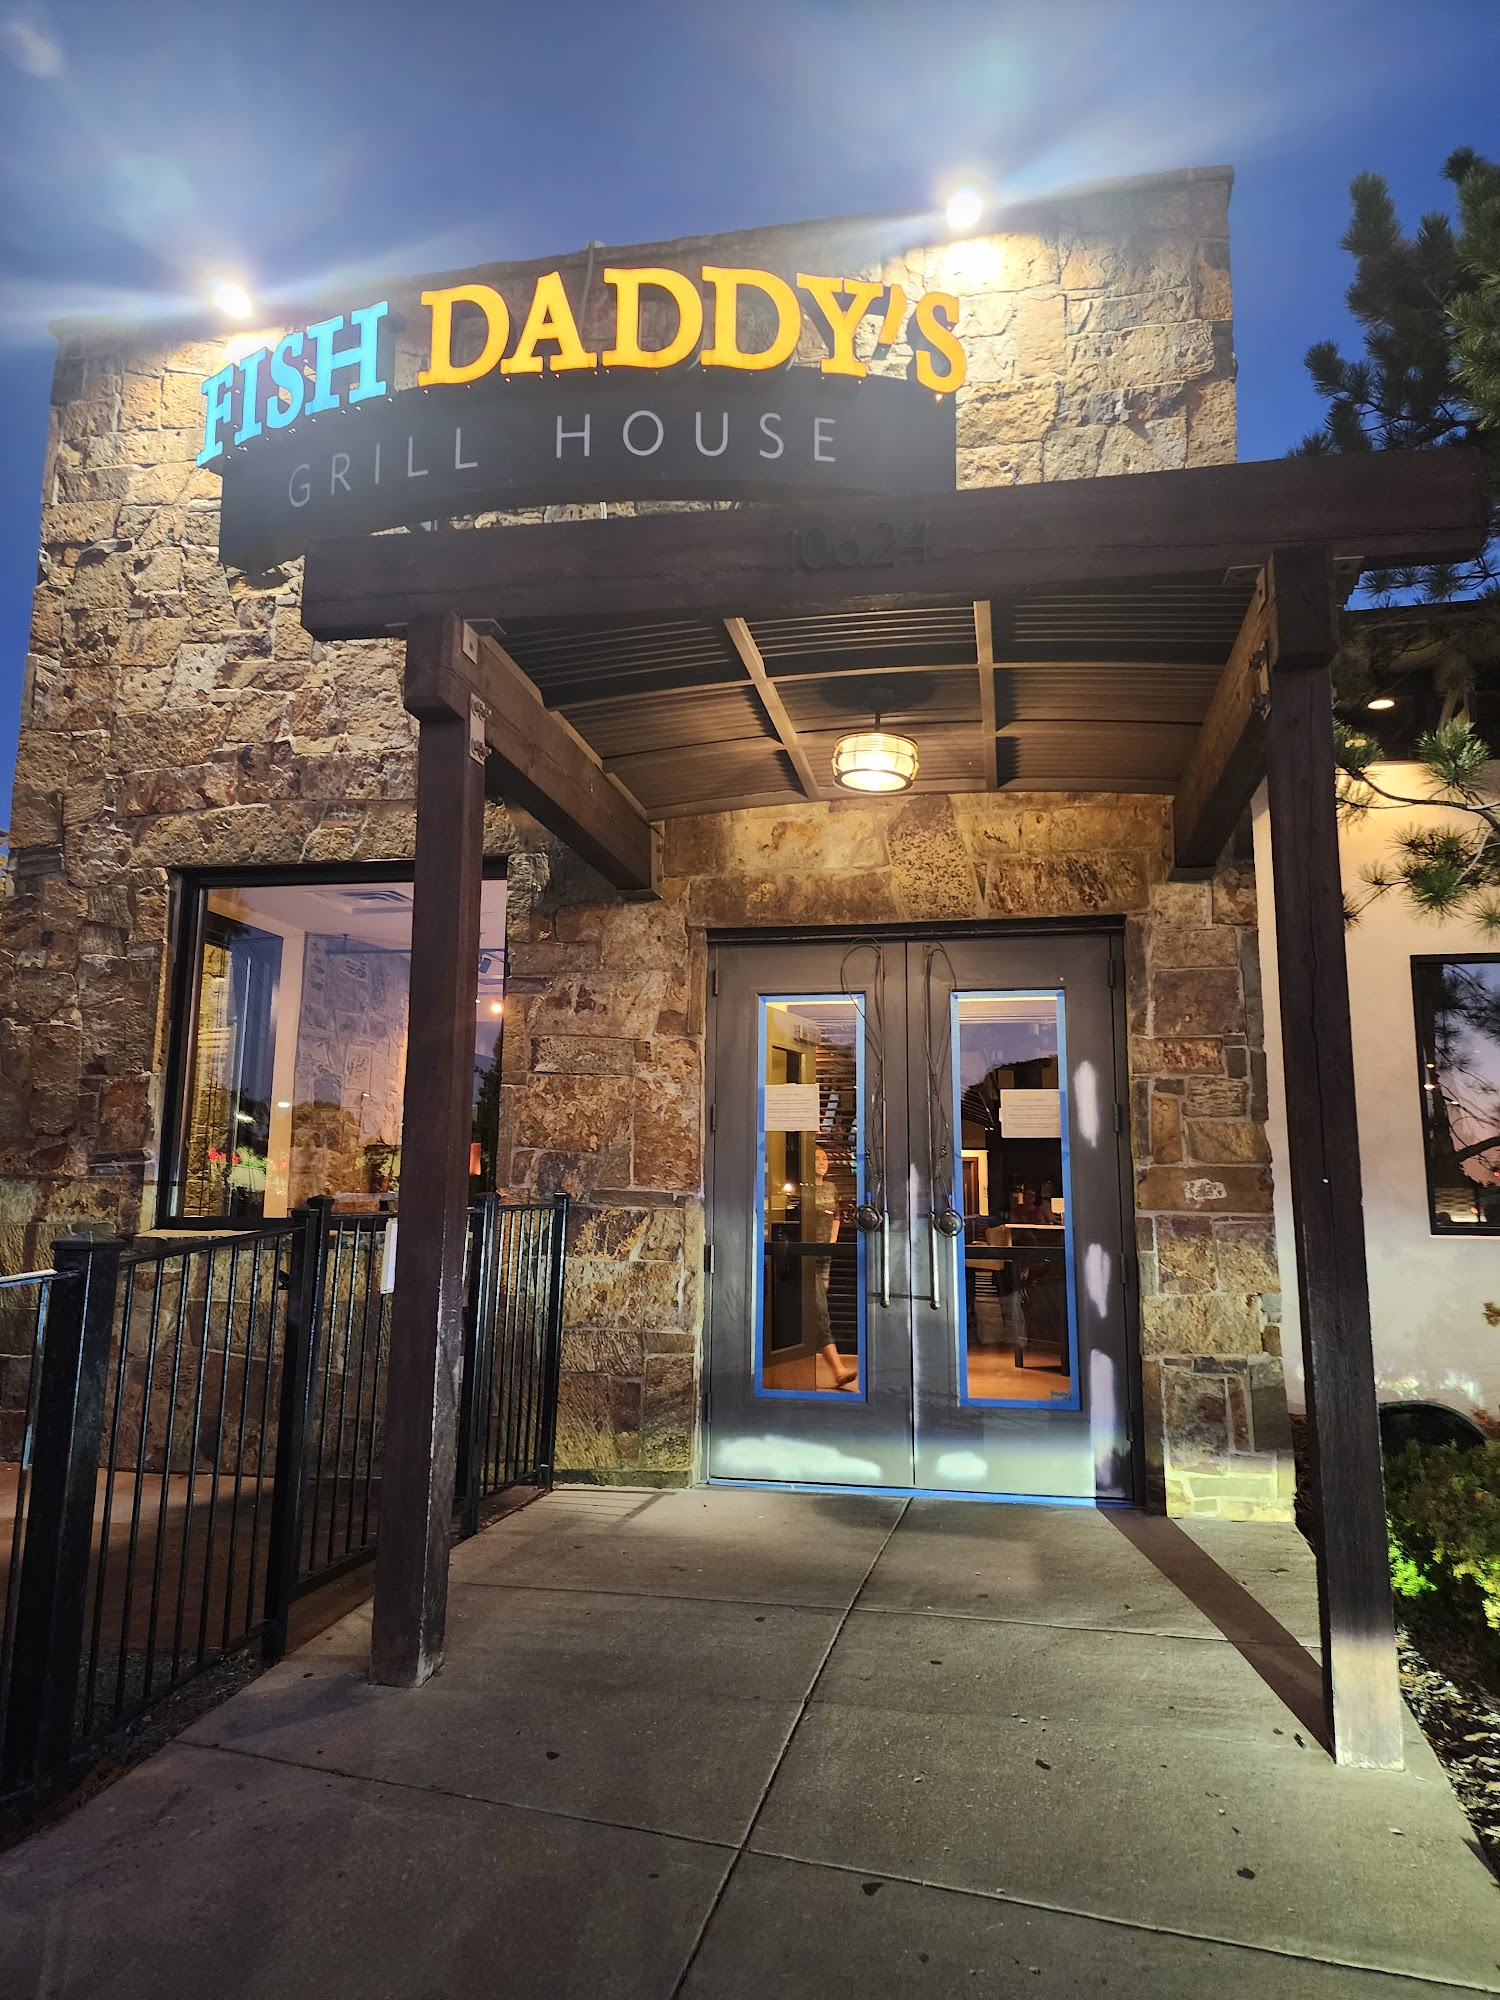 Fish Daddy's Grill House